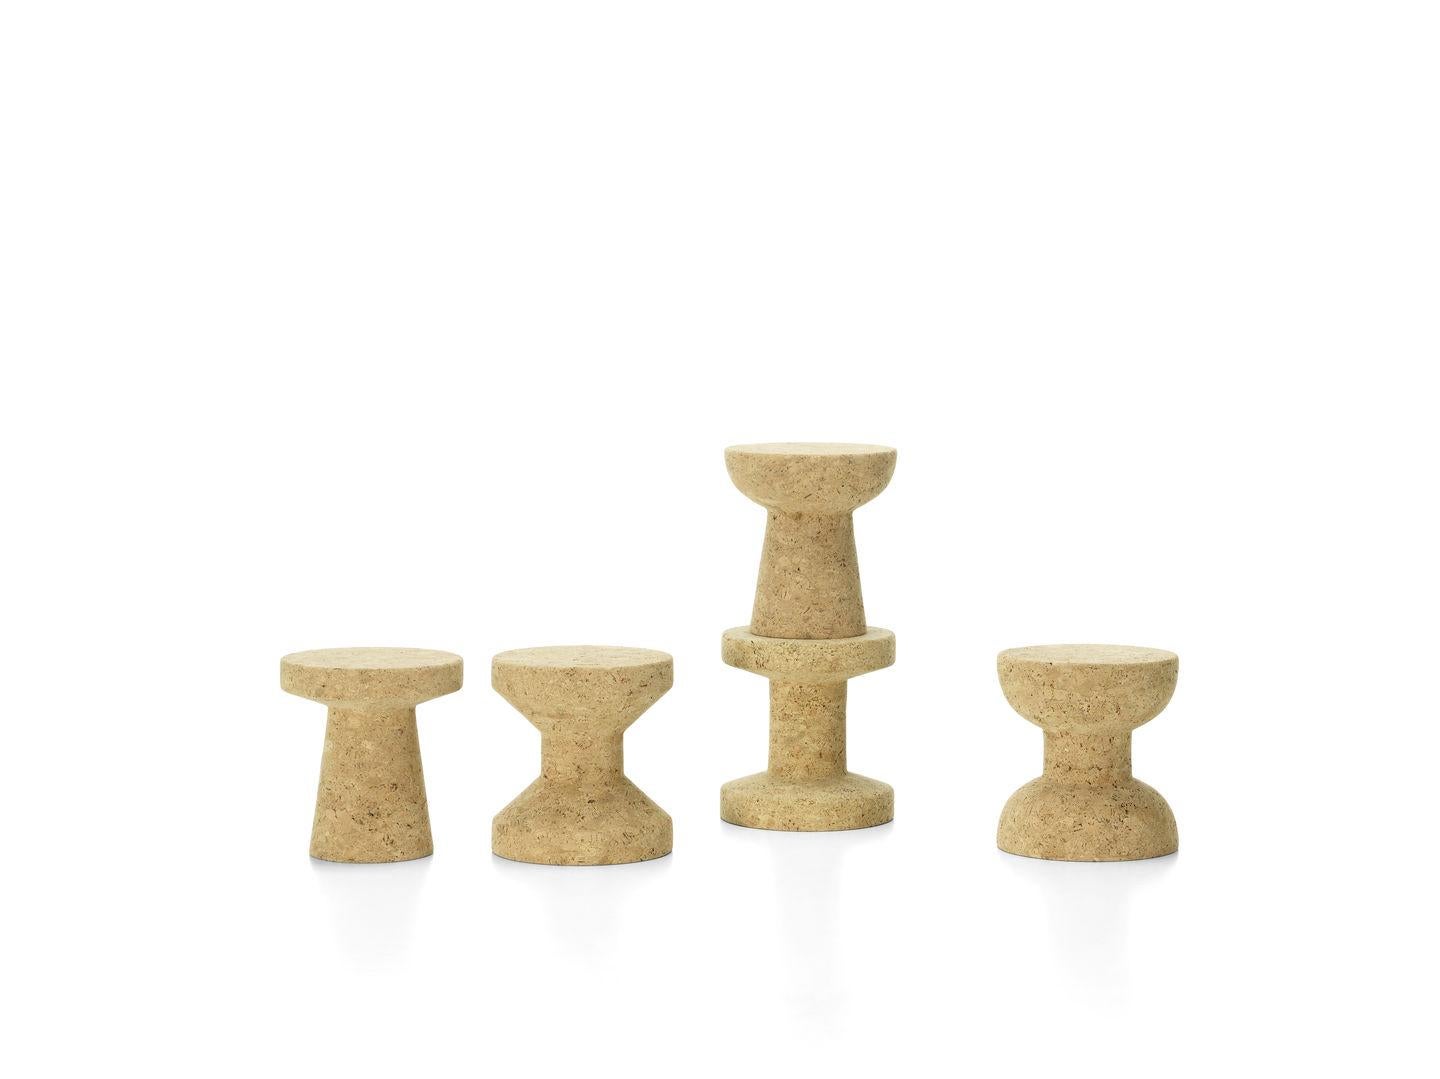 The robust members of the Cork Family stand firmly, making them suited for use as side tables or stools. They benefit from the advantageous natural properties of cork: comparatively lightweight and extremely durable, they also have a velvety surface